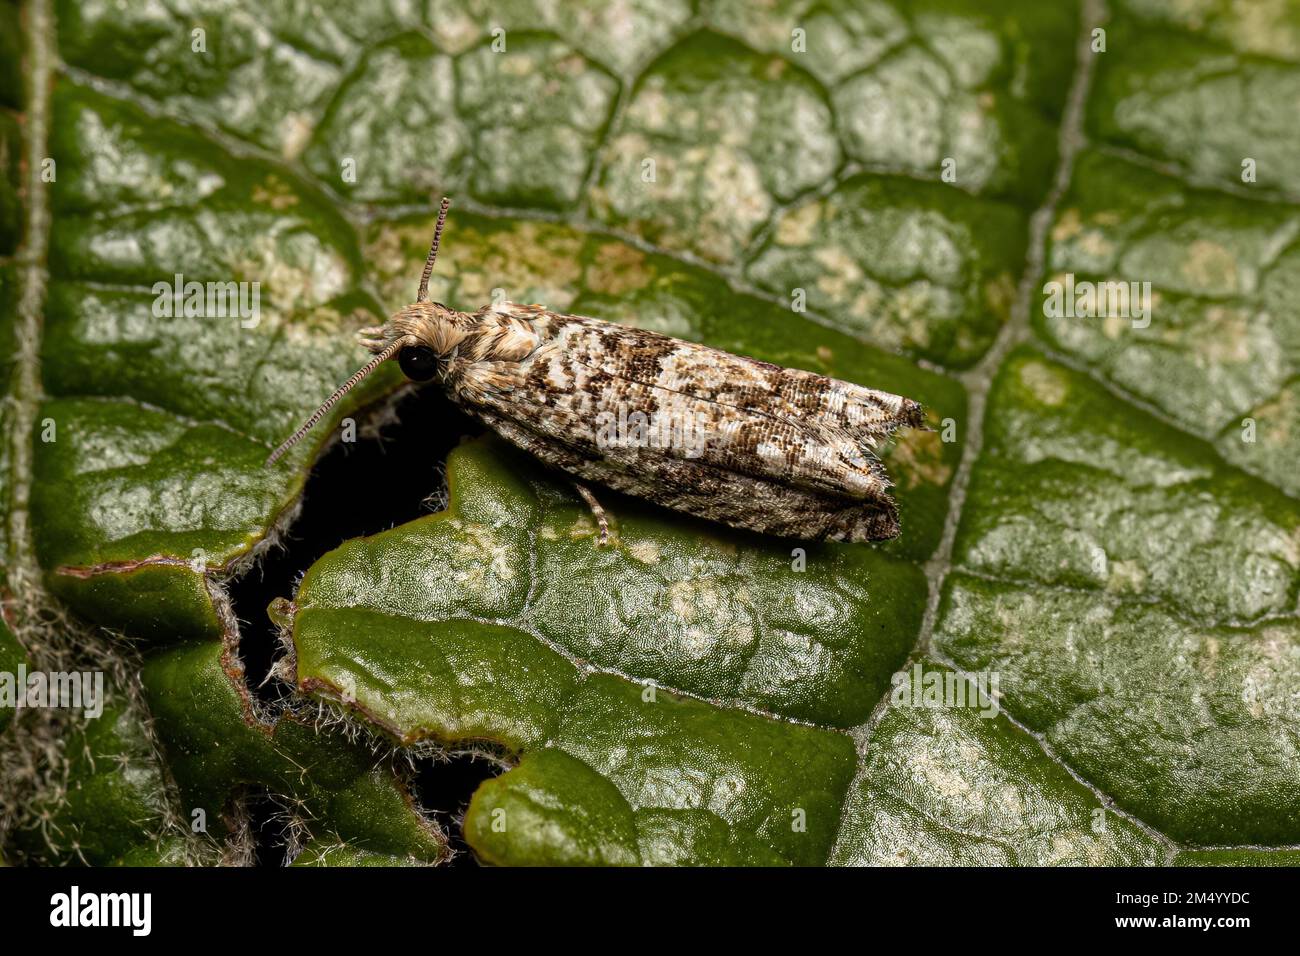 Adult Tortricid Leafroller Moth of the Family Tortricidae Stock Photo